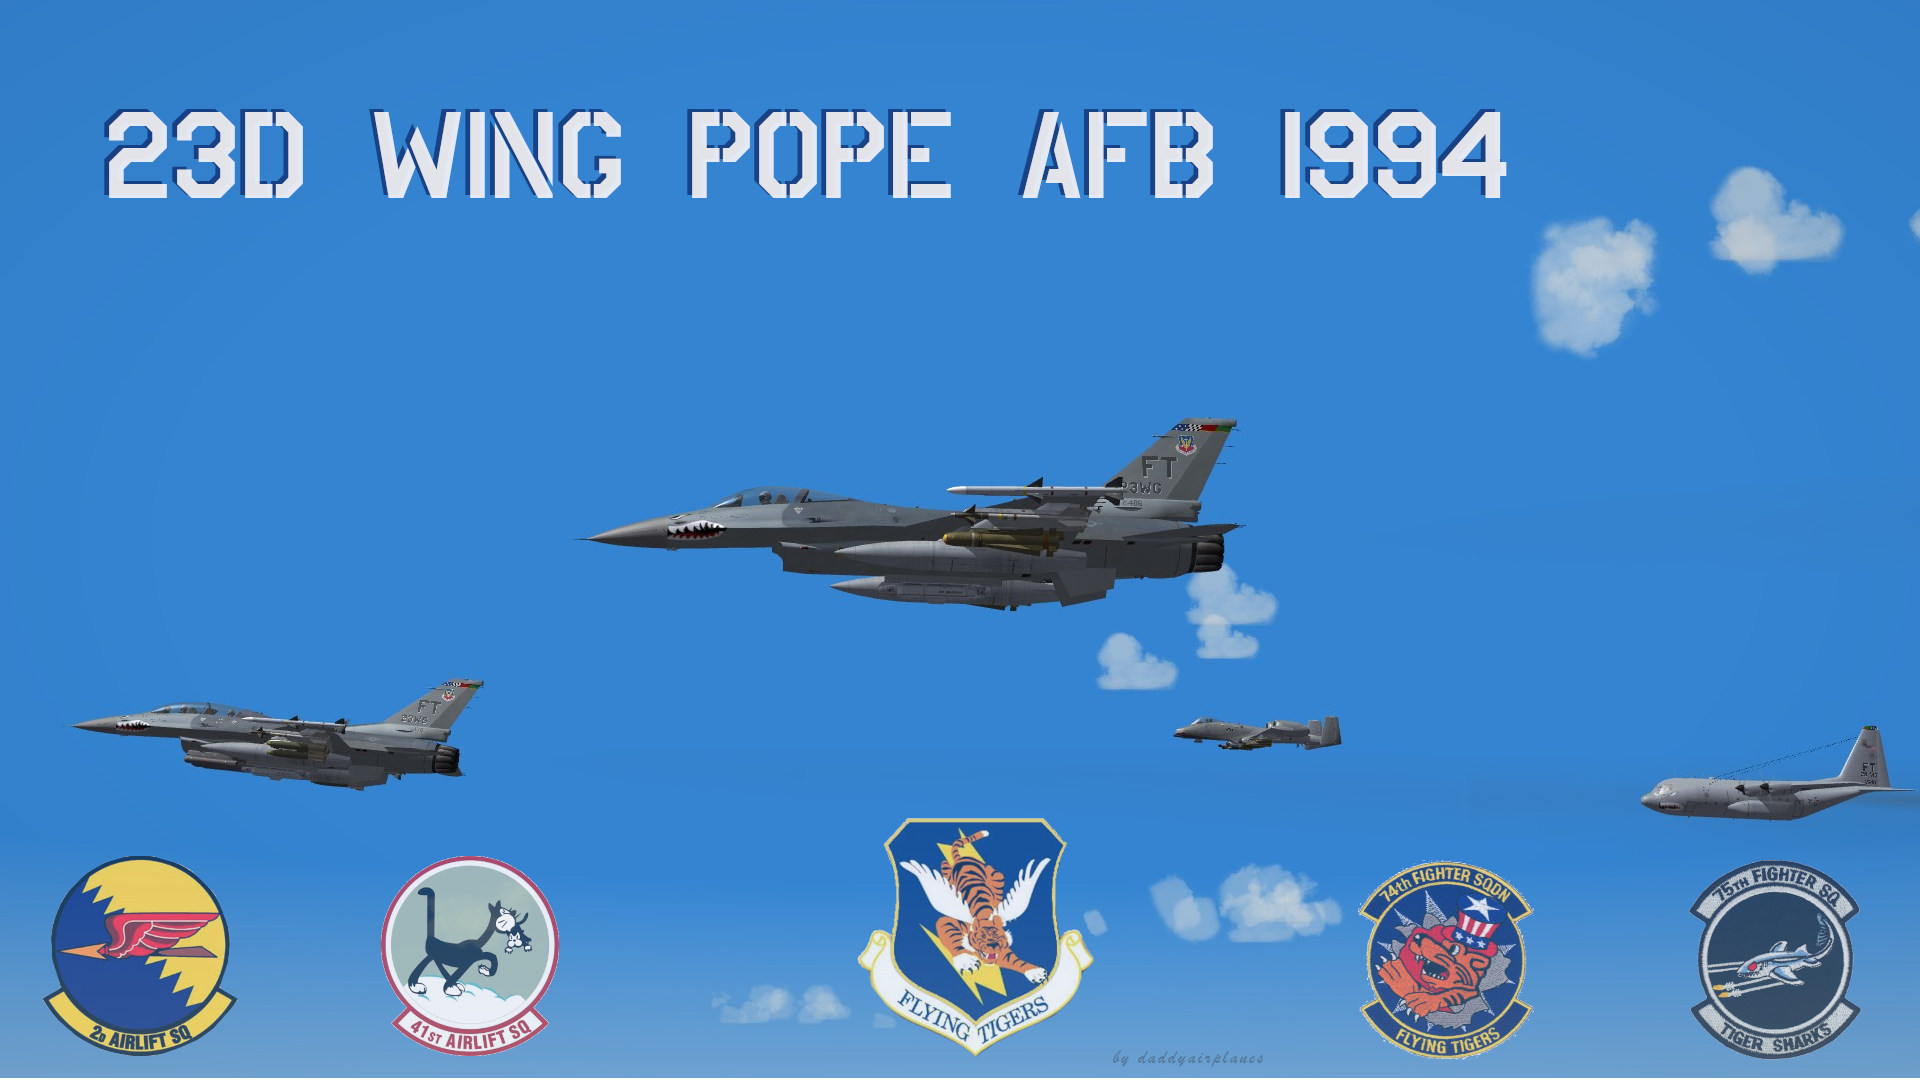 23d Wing Pope AFB 1994